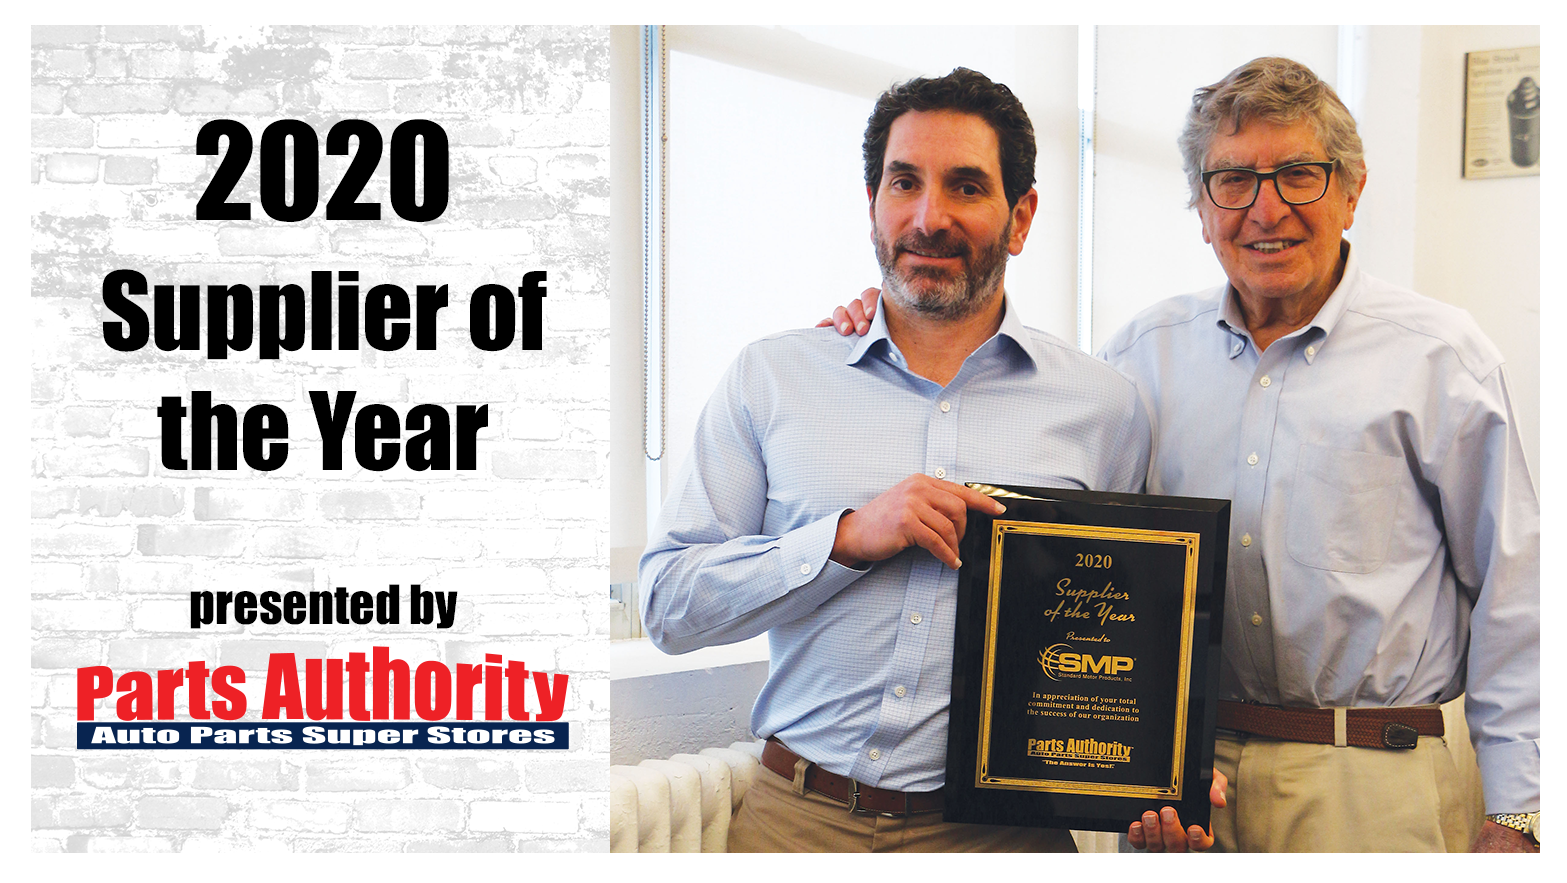 SMP Named 2020 Supplier of the Year by Parts Authority